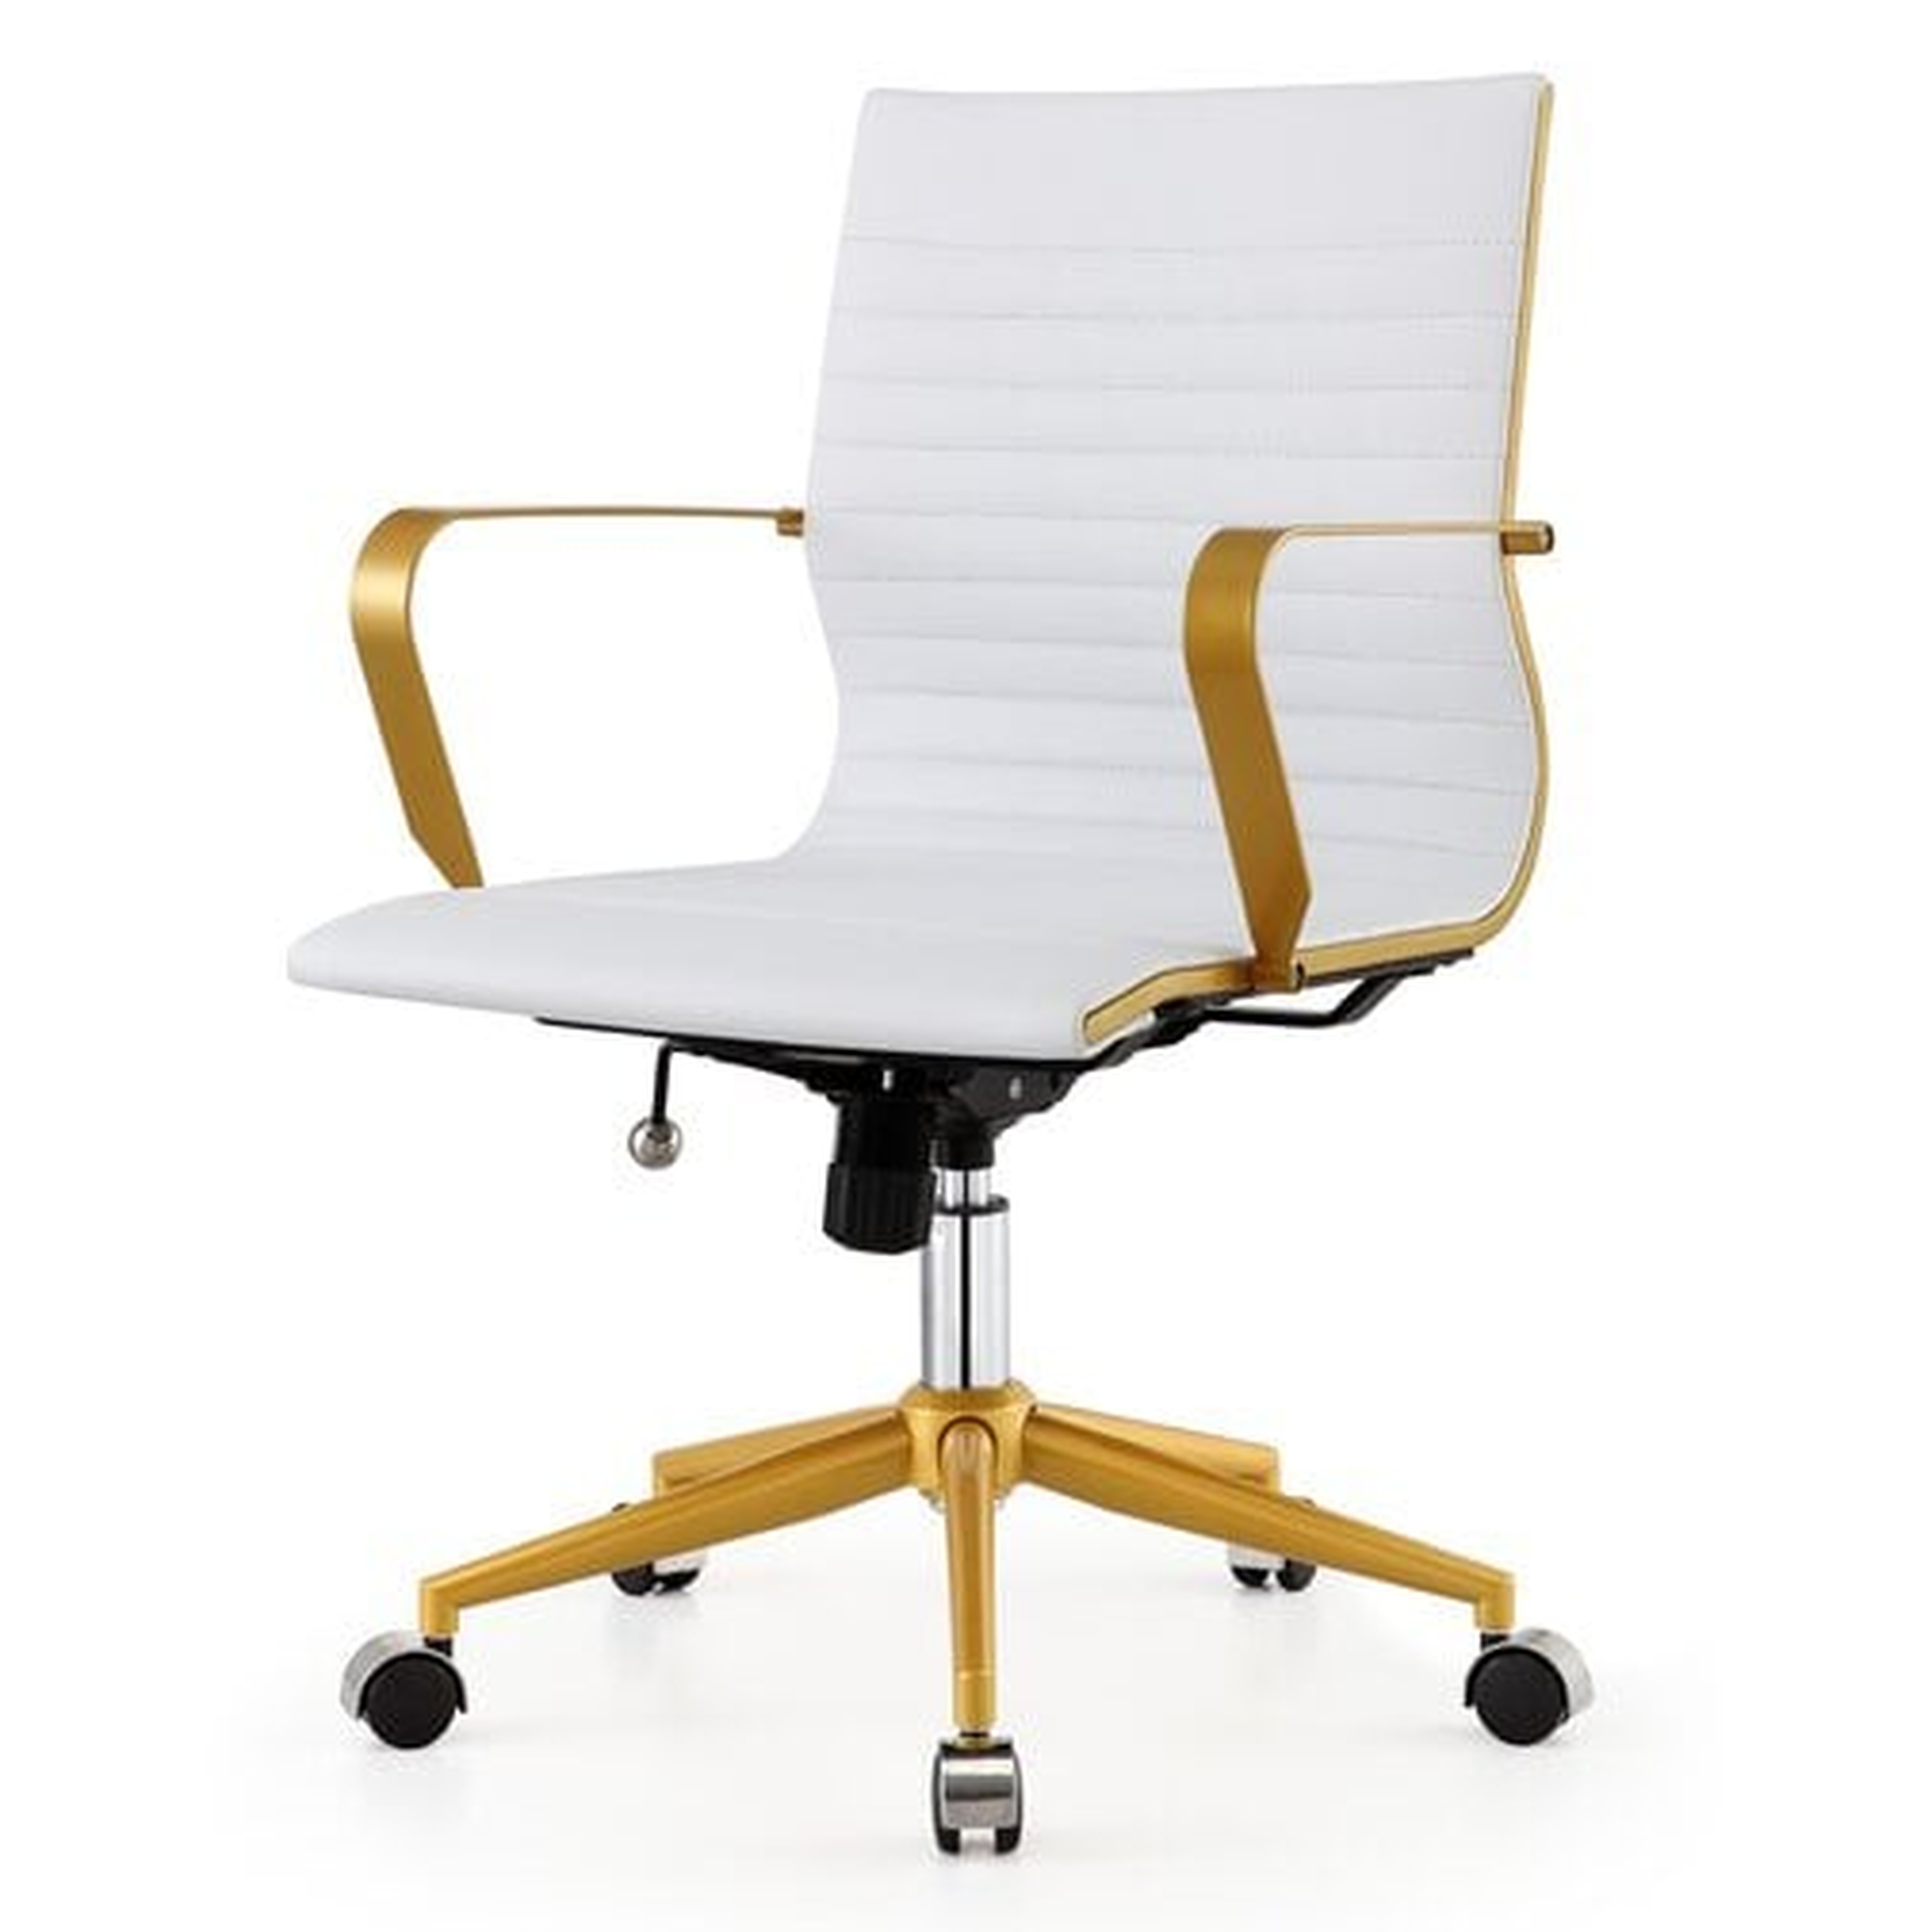 Conference Chair - Wayfair